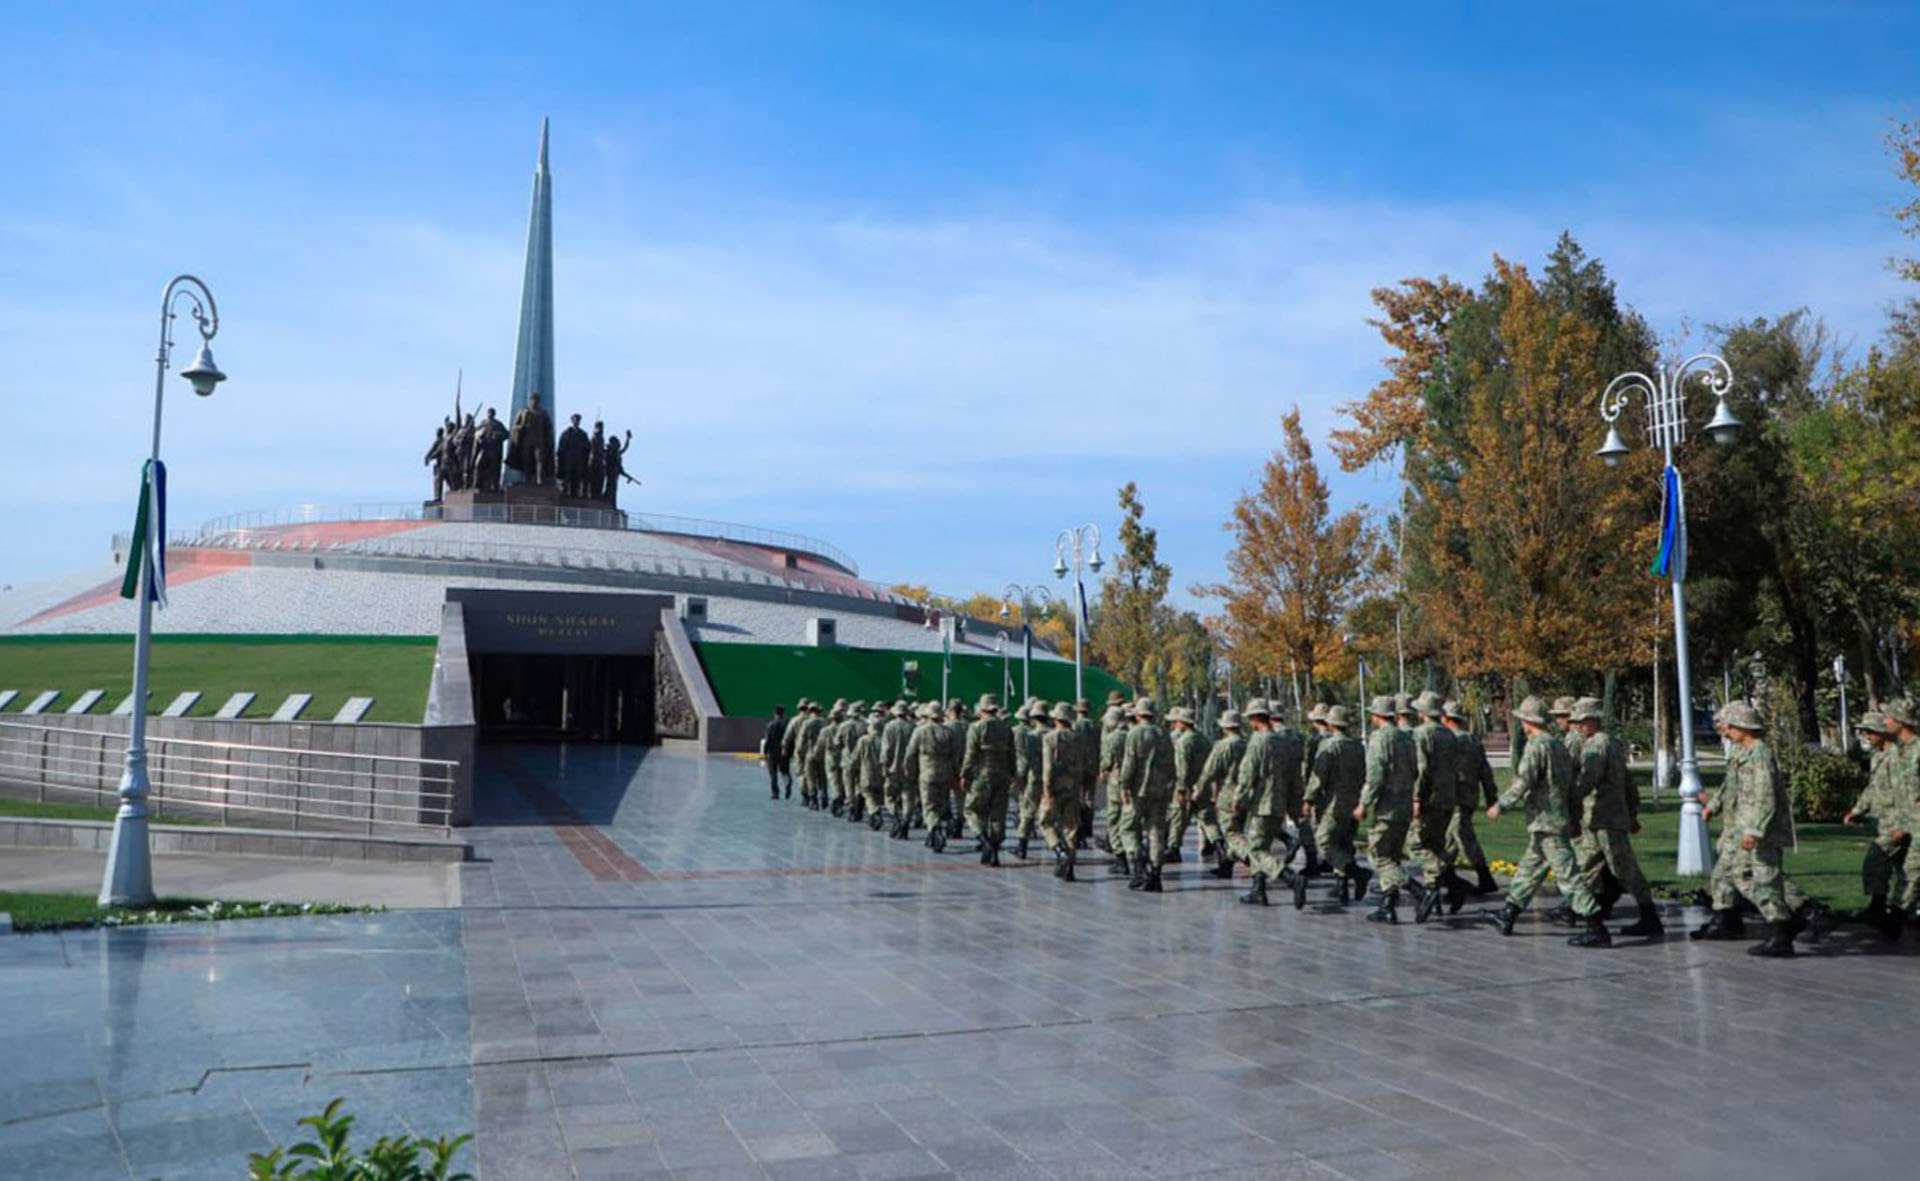 Participants of the School of Courage meeting organized an excursion to Victory Park